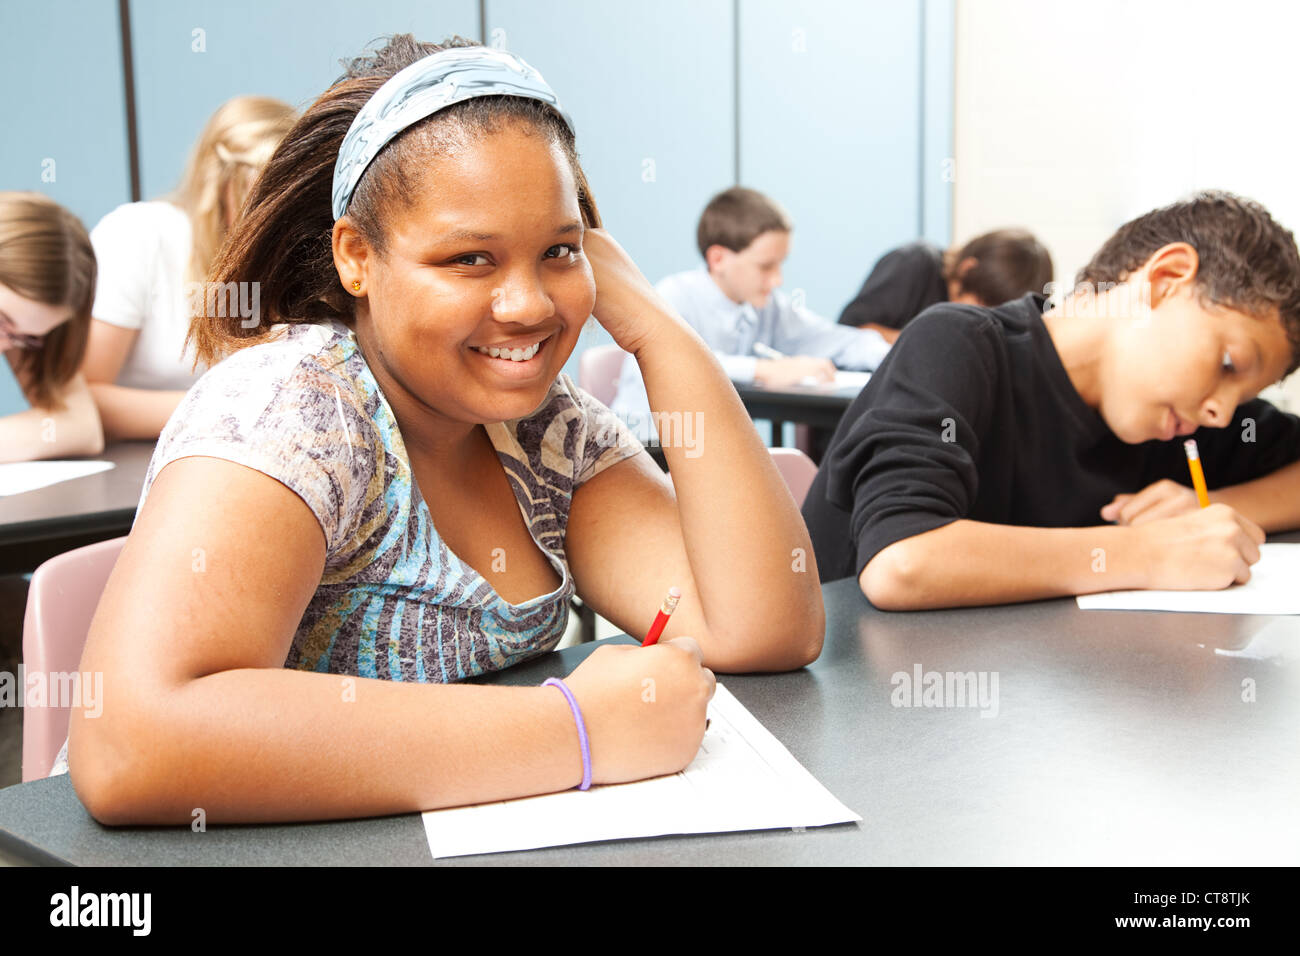 Pretty African-American girl in diverse middle school class.  Stock Photo